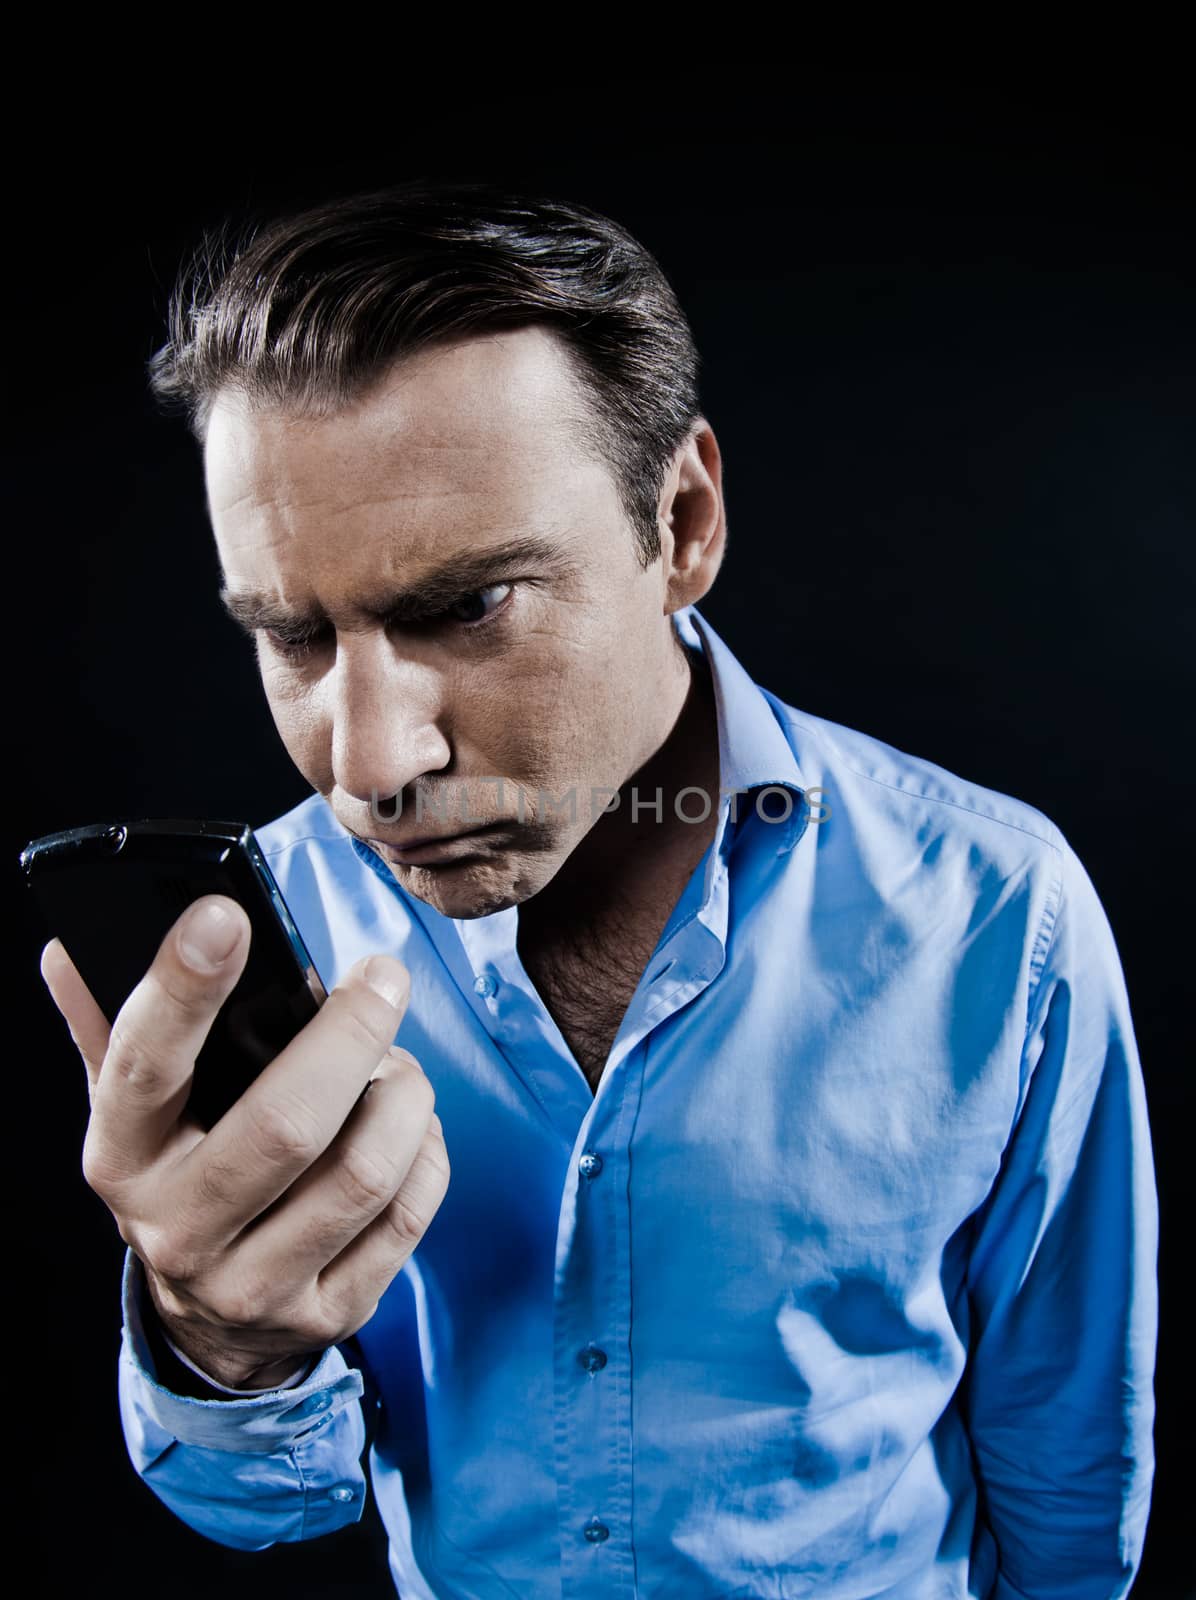 Man Portrait Angry looking at telephone videophone smartphone  by PIXSTILL